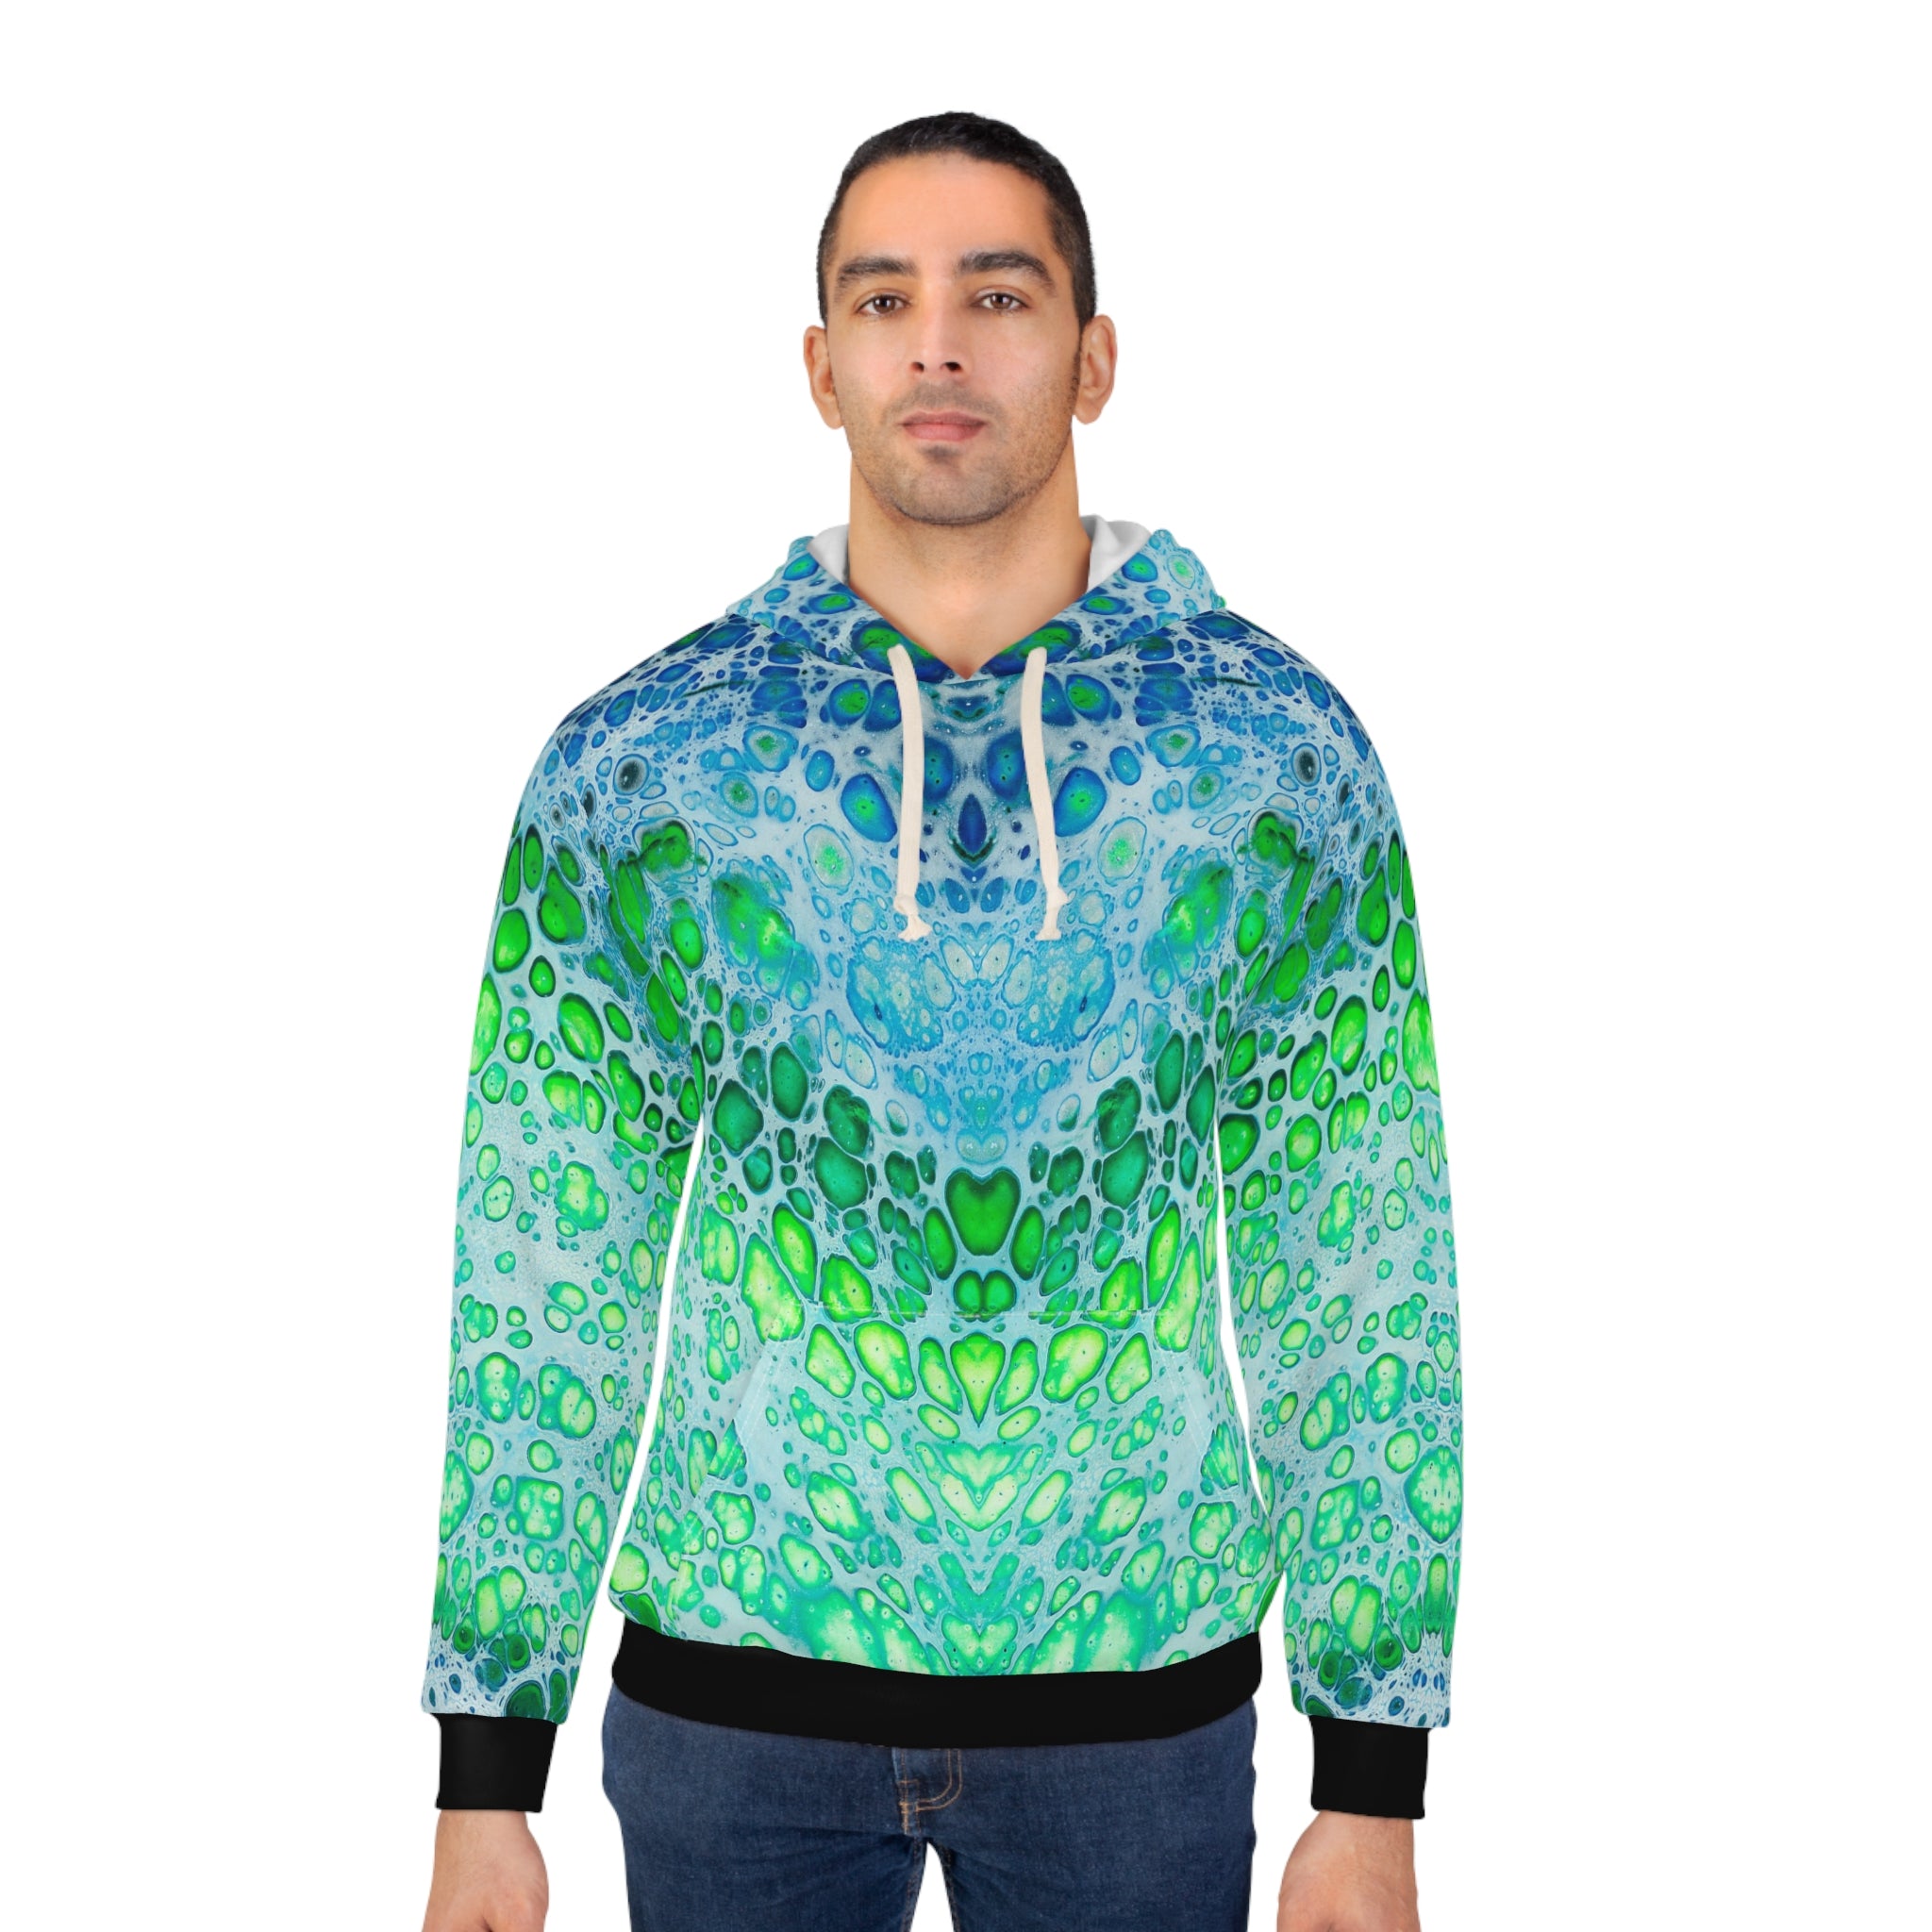 Cameron Creations - Cellonious A - Pullover Hoodie - Male